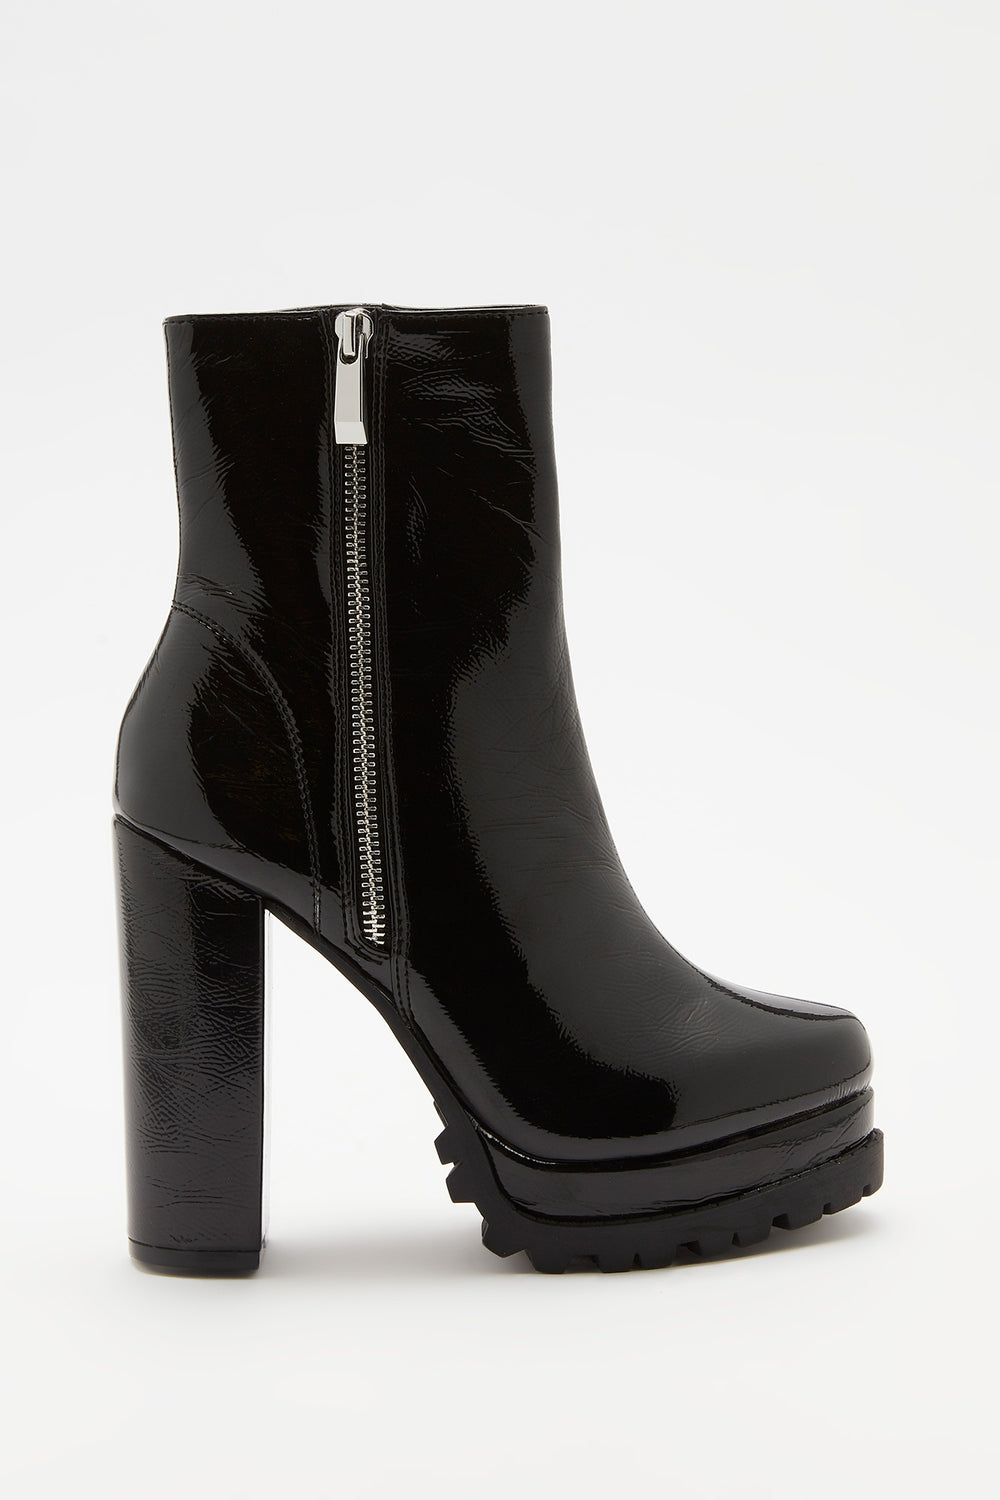 boots charlotte russe